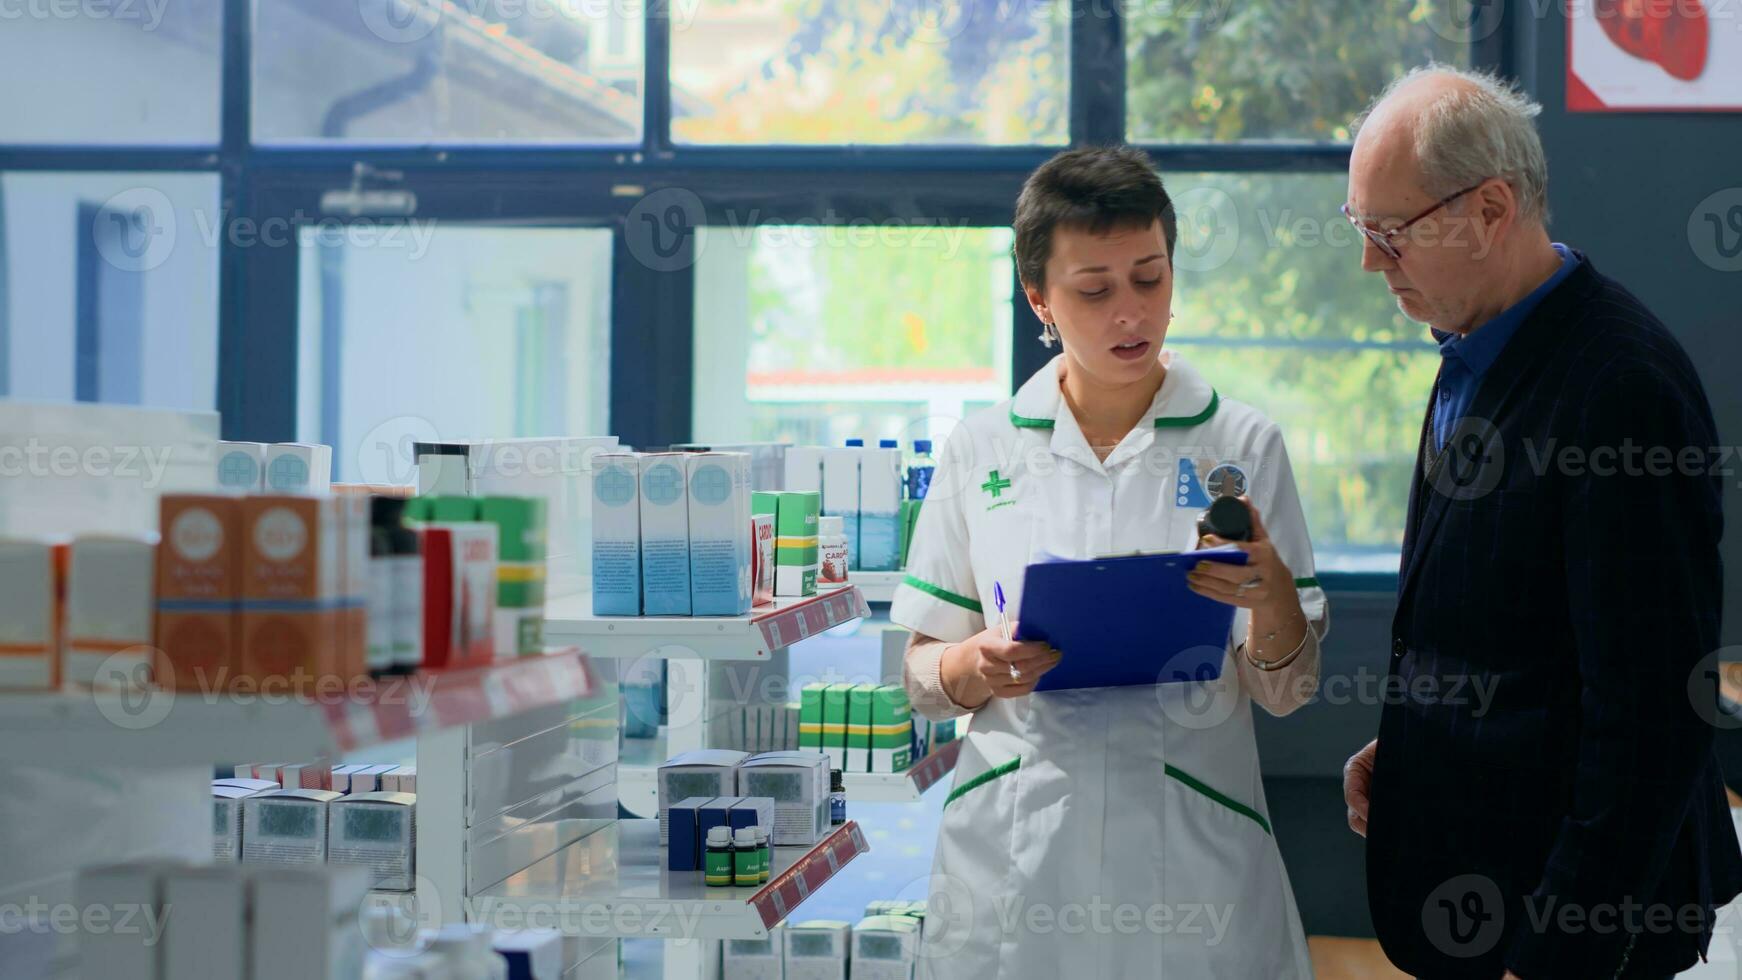 Elderly man in need of prescription drugs informations in apothecary, asking chemist checking medicinal products inventory. Pharmacy technician helping senior client with advice photo